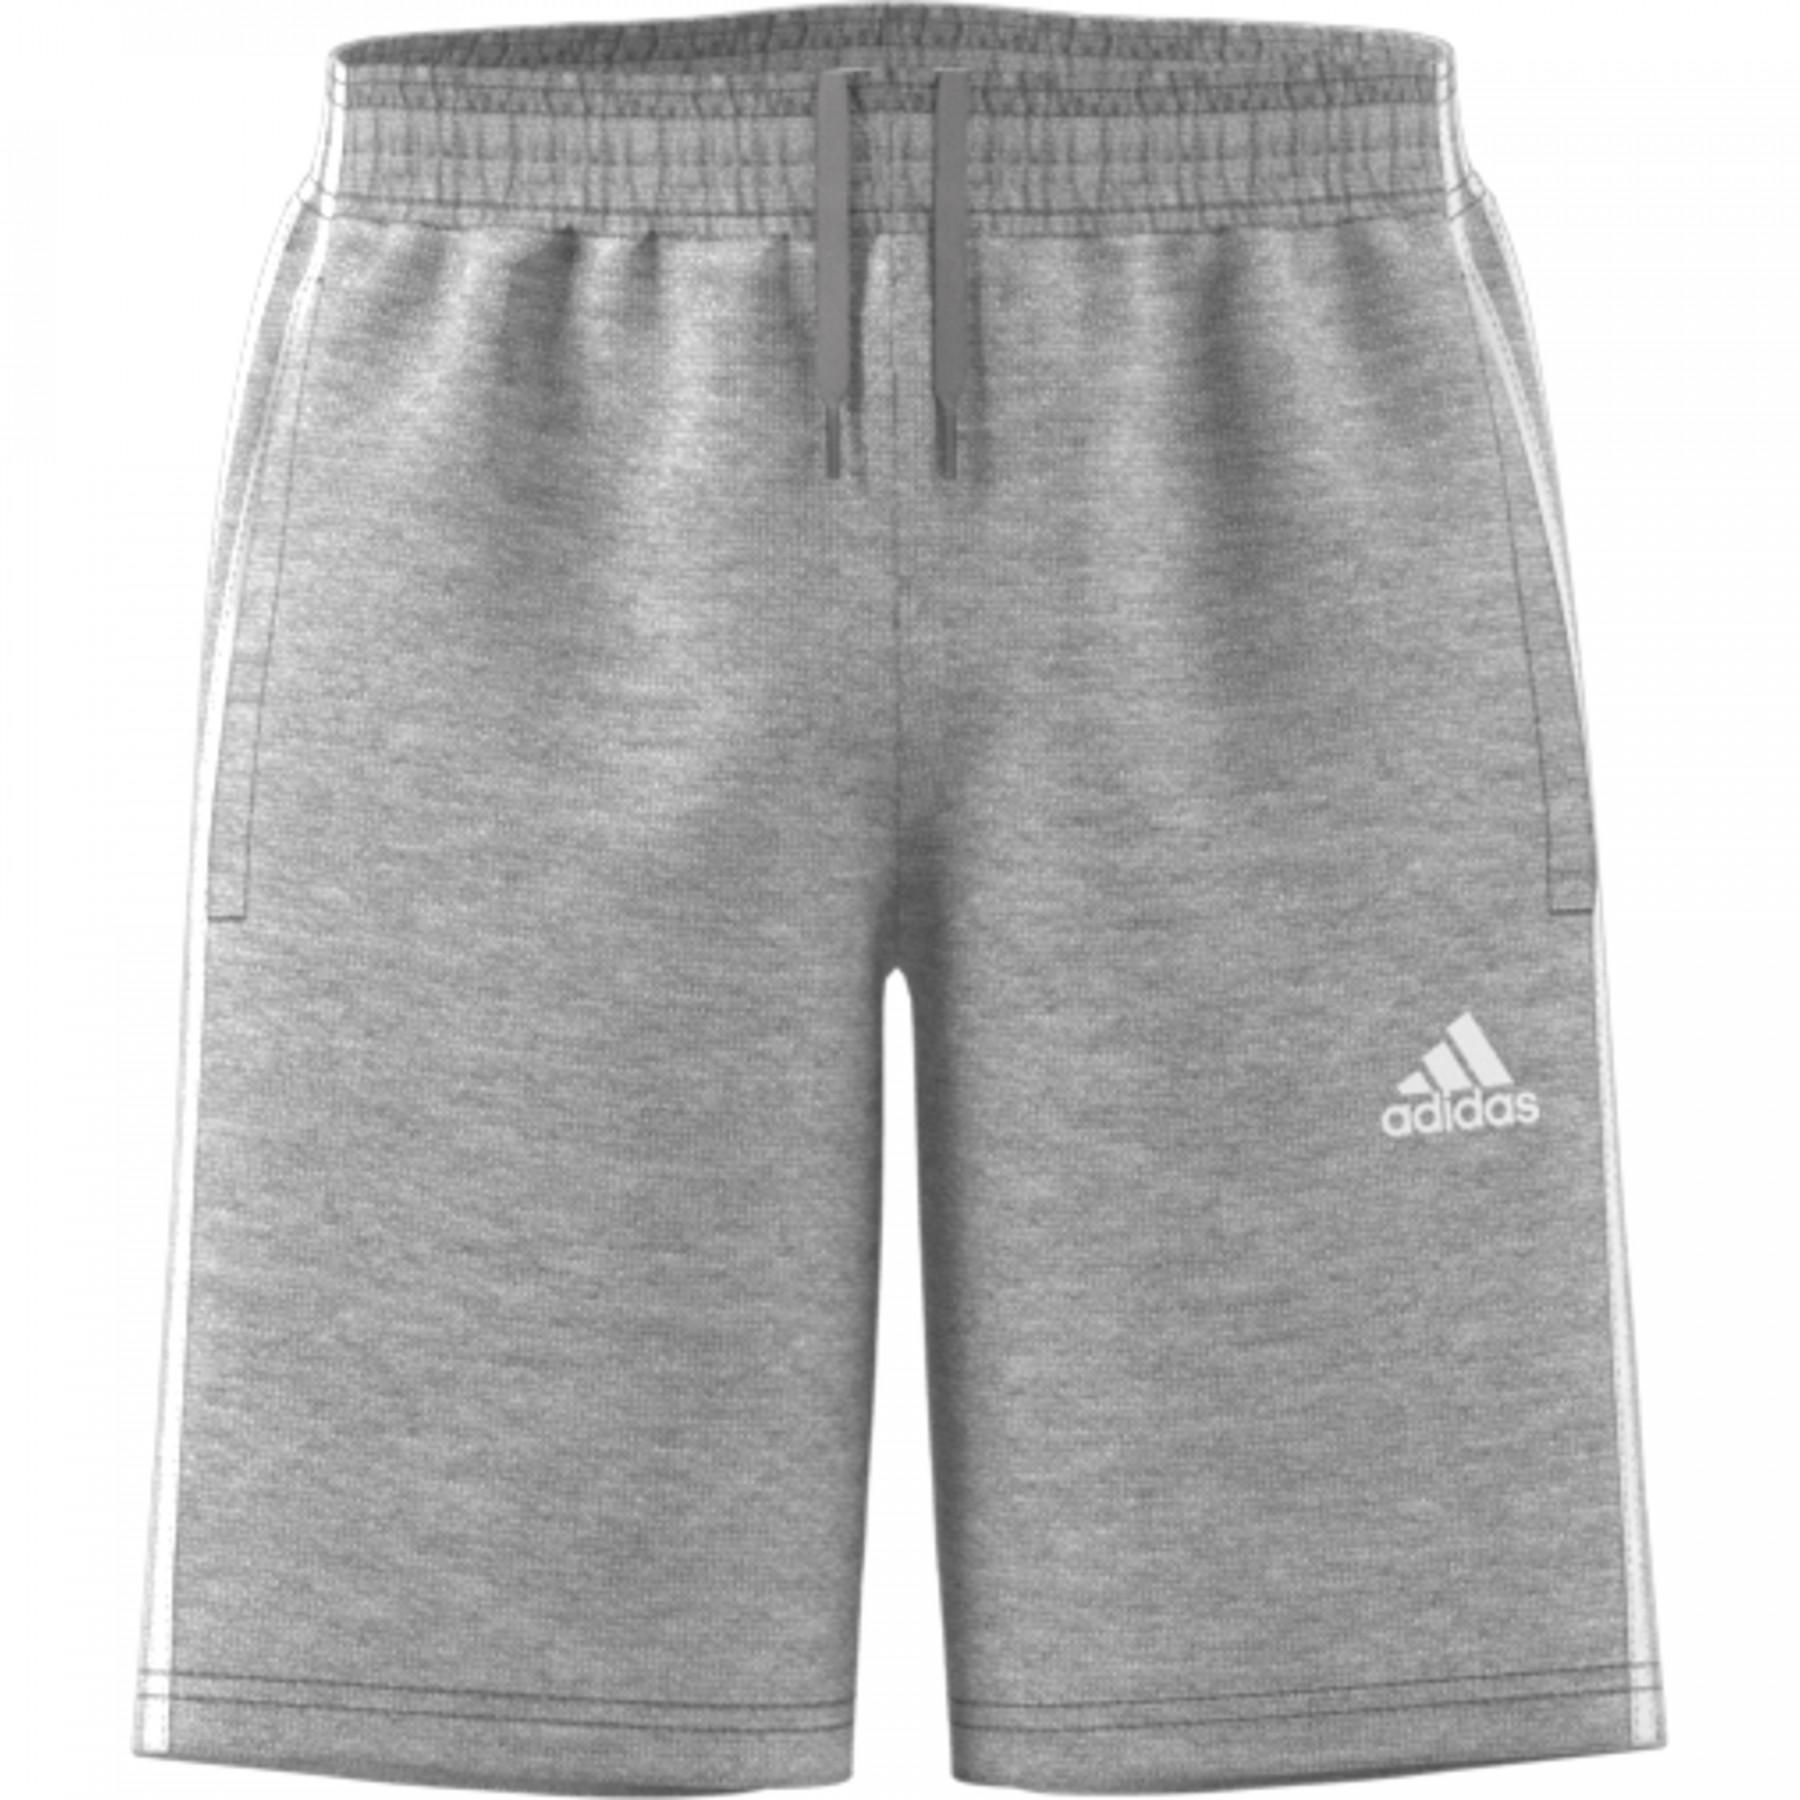 Children's shorts adidas Must Haves 3-Stripes